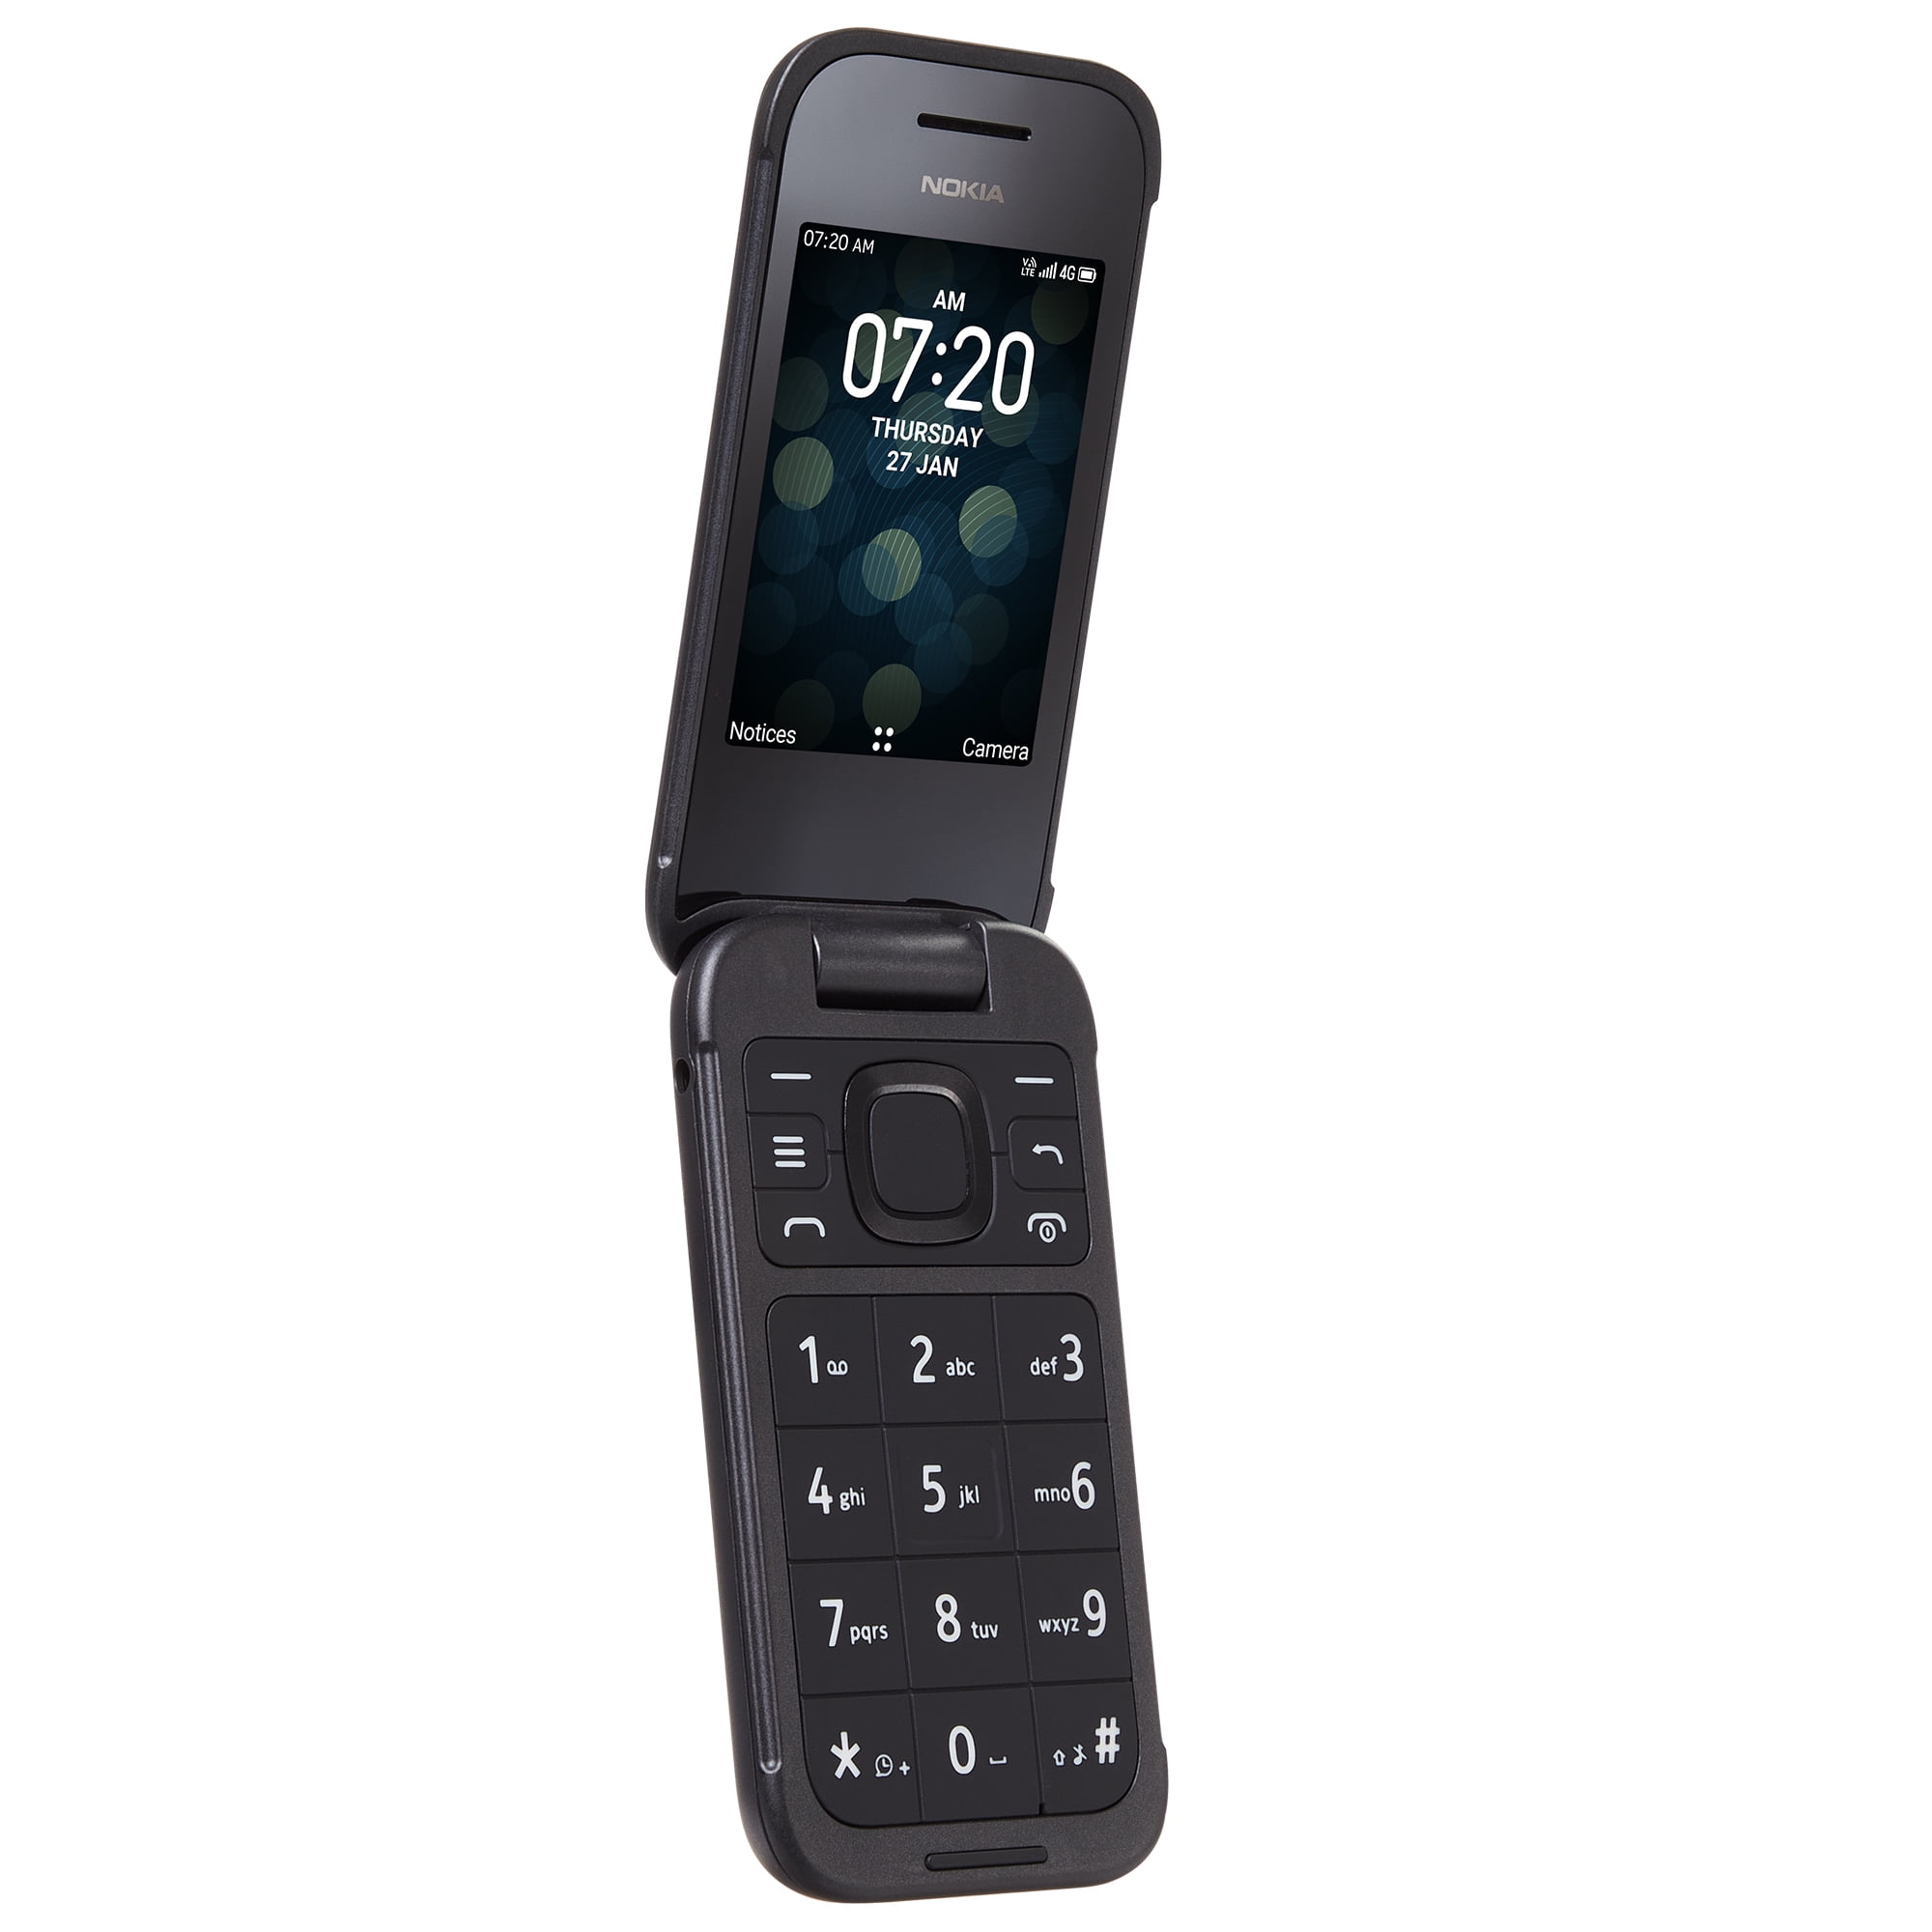 Tracfone Nokia 2760 Flip, 4GB, Black - Prepaid Feature Phone [Locked to  Tracfone Wireless]